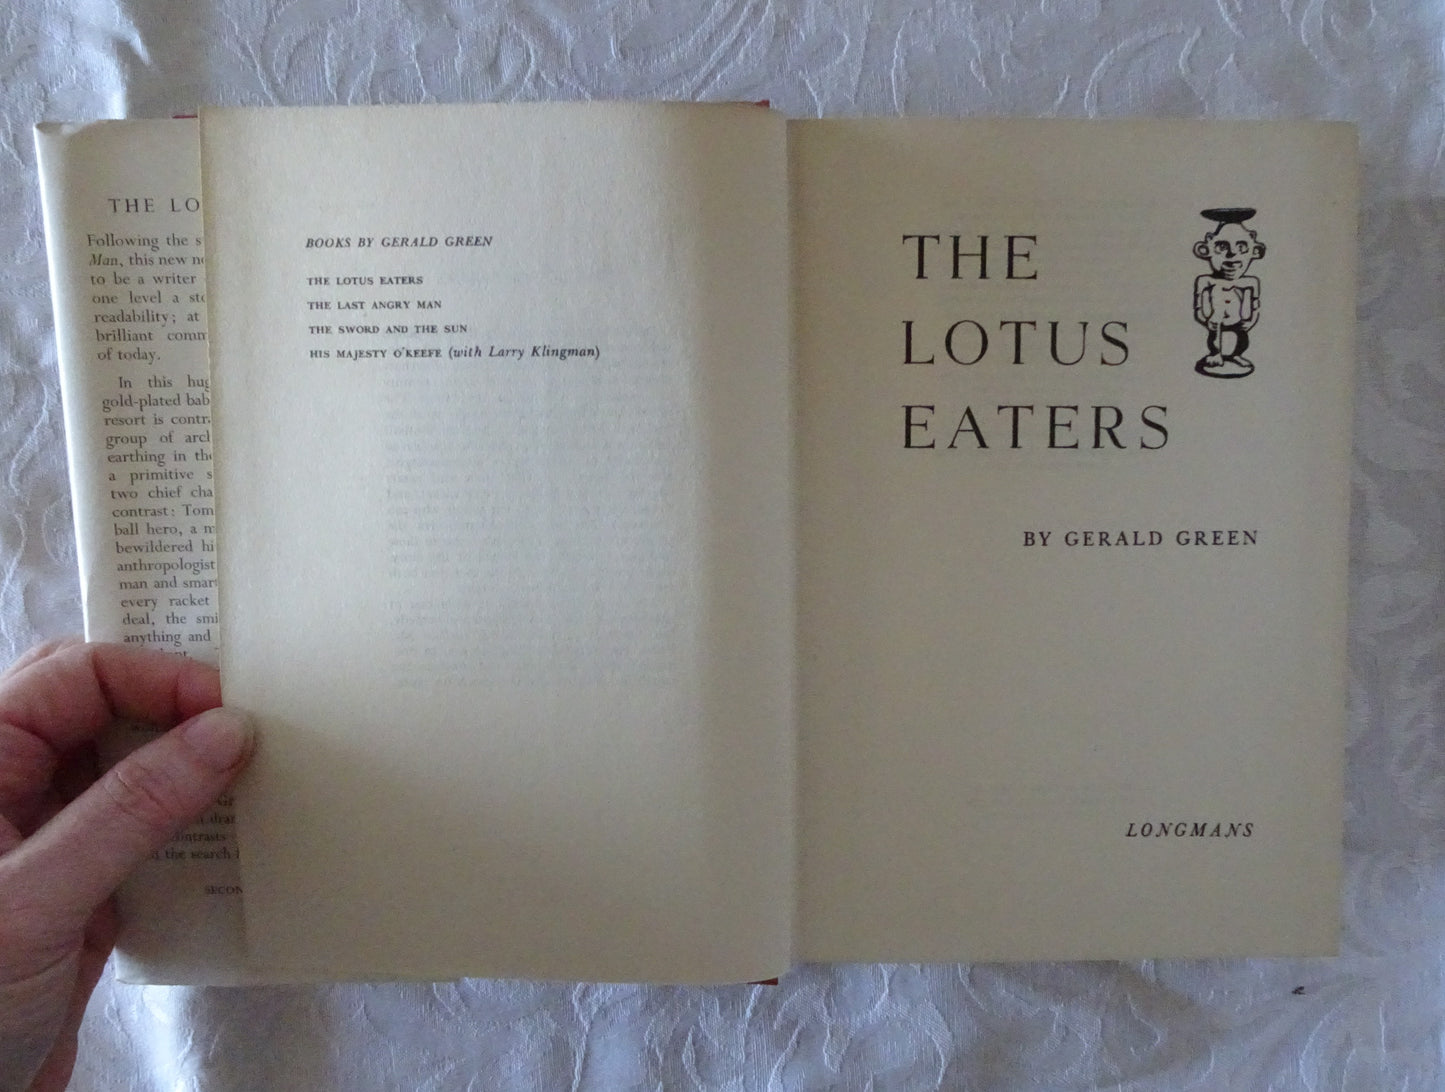 The Lotus Eaters by Gerald Green